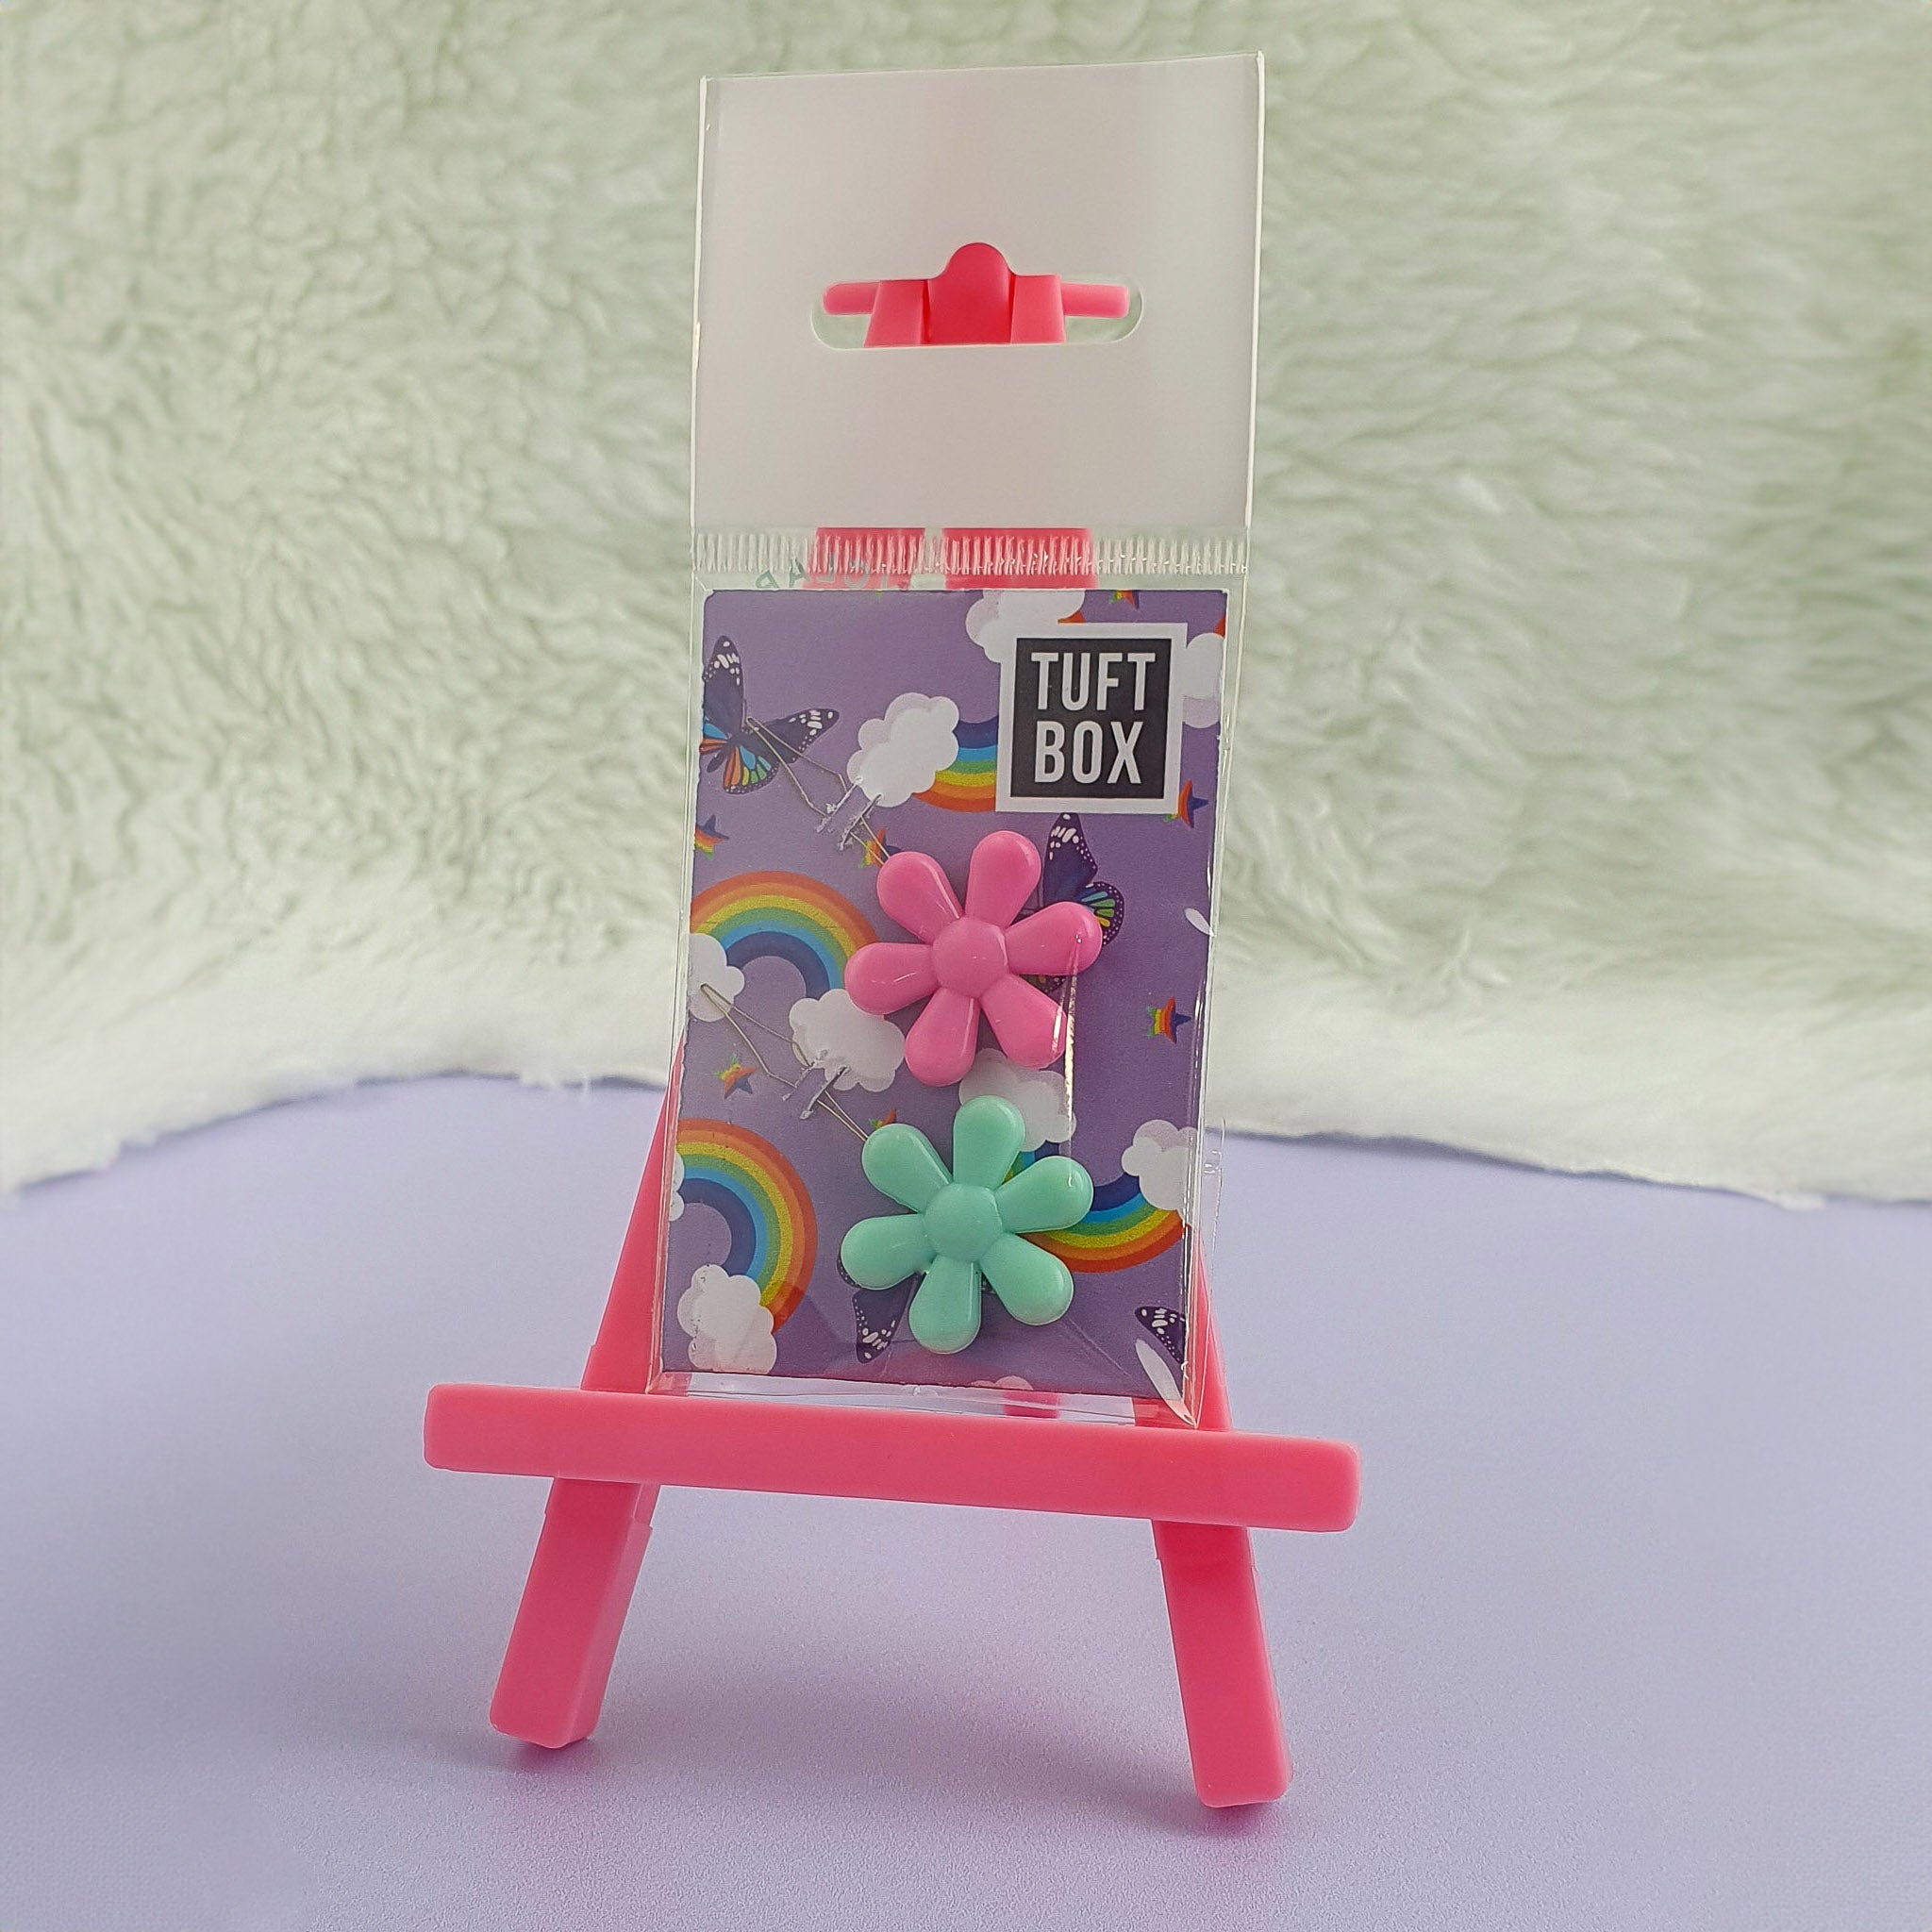 Needle threaders pink/mint in rainbow pack